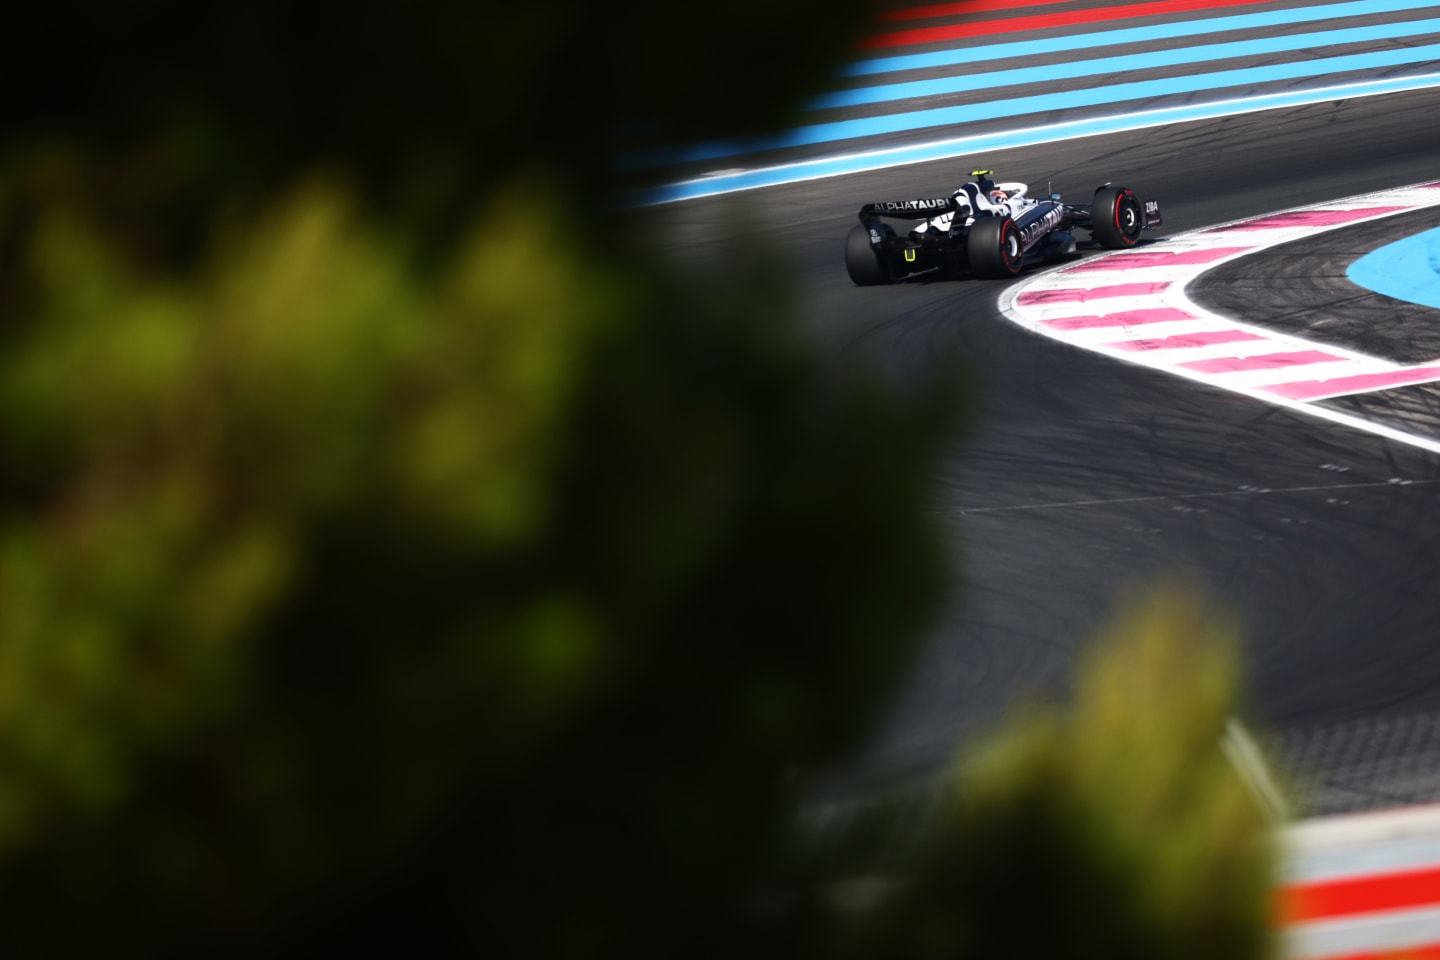 LE CASTELLET, FRANCE - JULY 23: Yuki Tsunoda of Japan driving the (22) Scuderia AlphaTauri AT03 on track during qualifying ahead of the F1 Grand Prix of France at Circuit Paul Ricard on July 23, 2022 in Le Castellet, France. (Photo by Clive Rose/Getty Images)